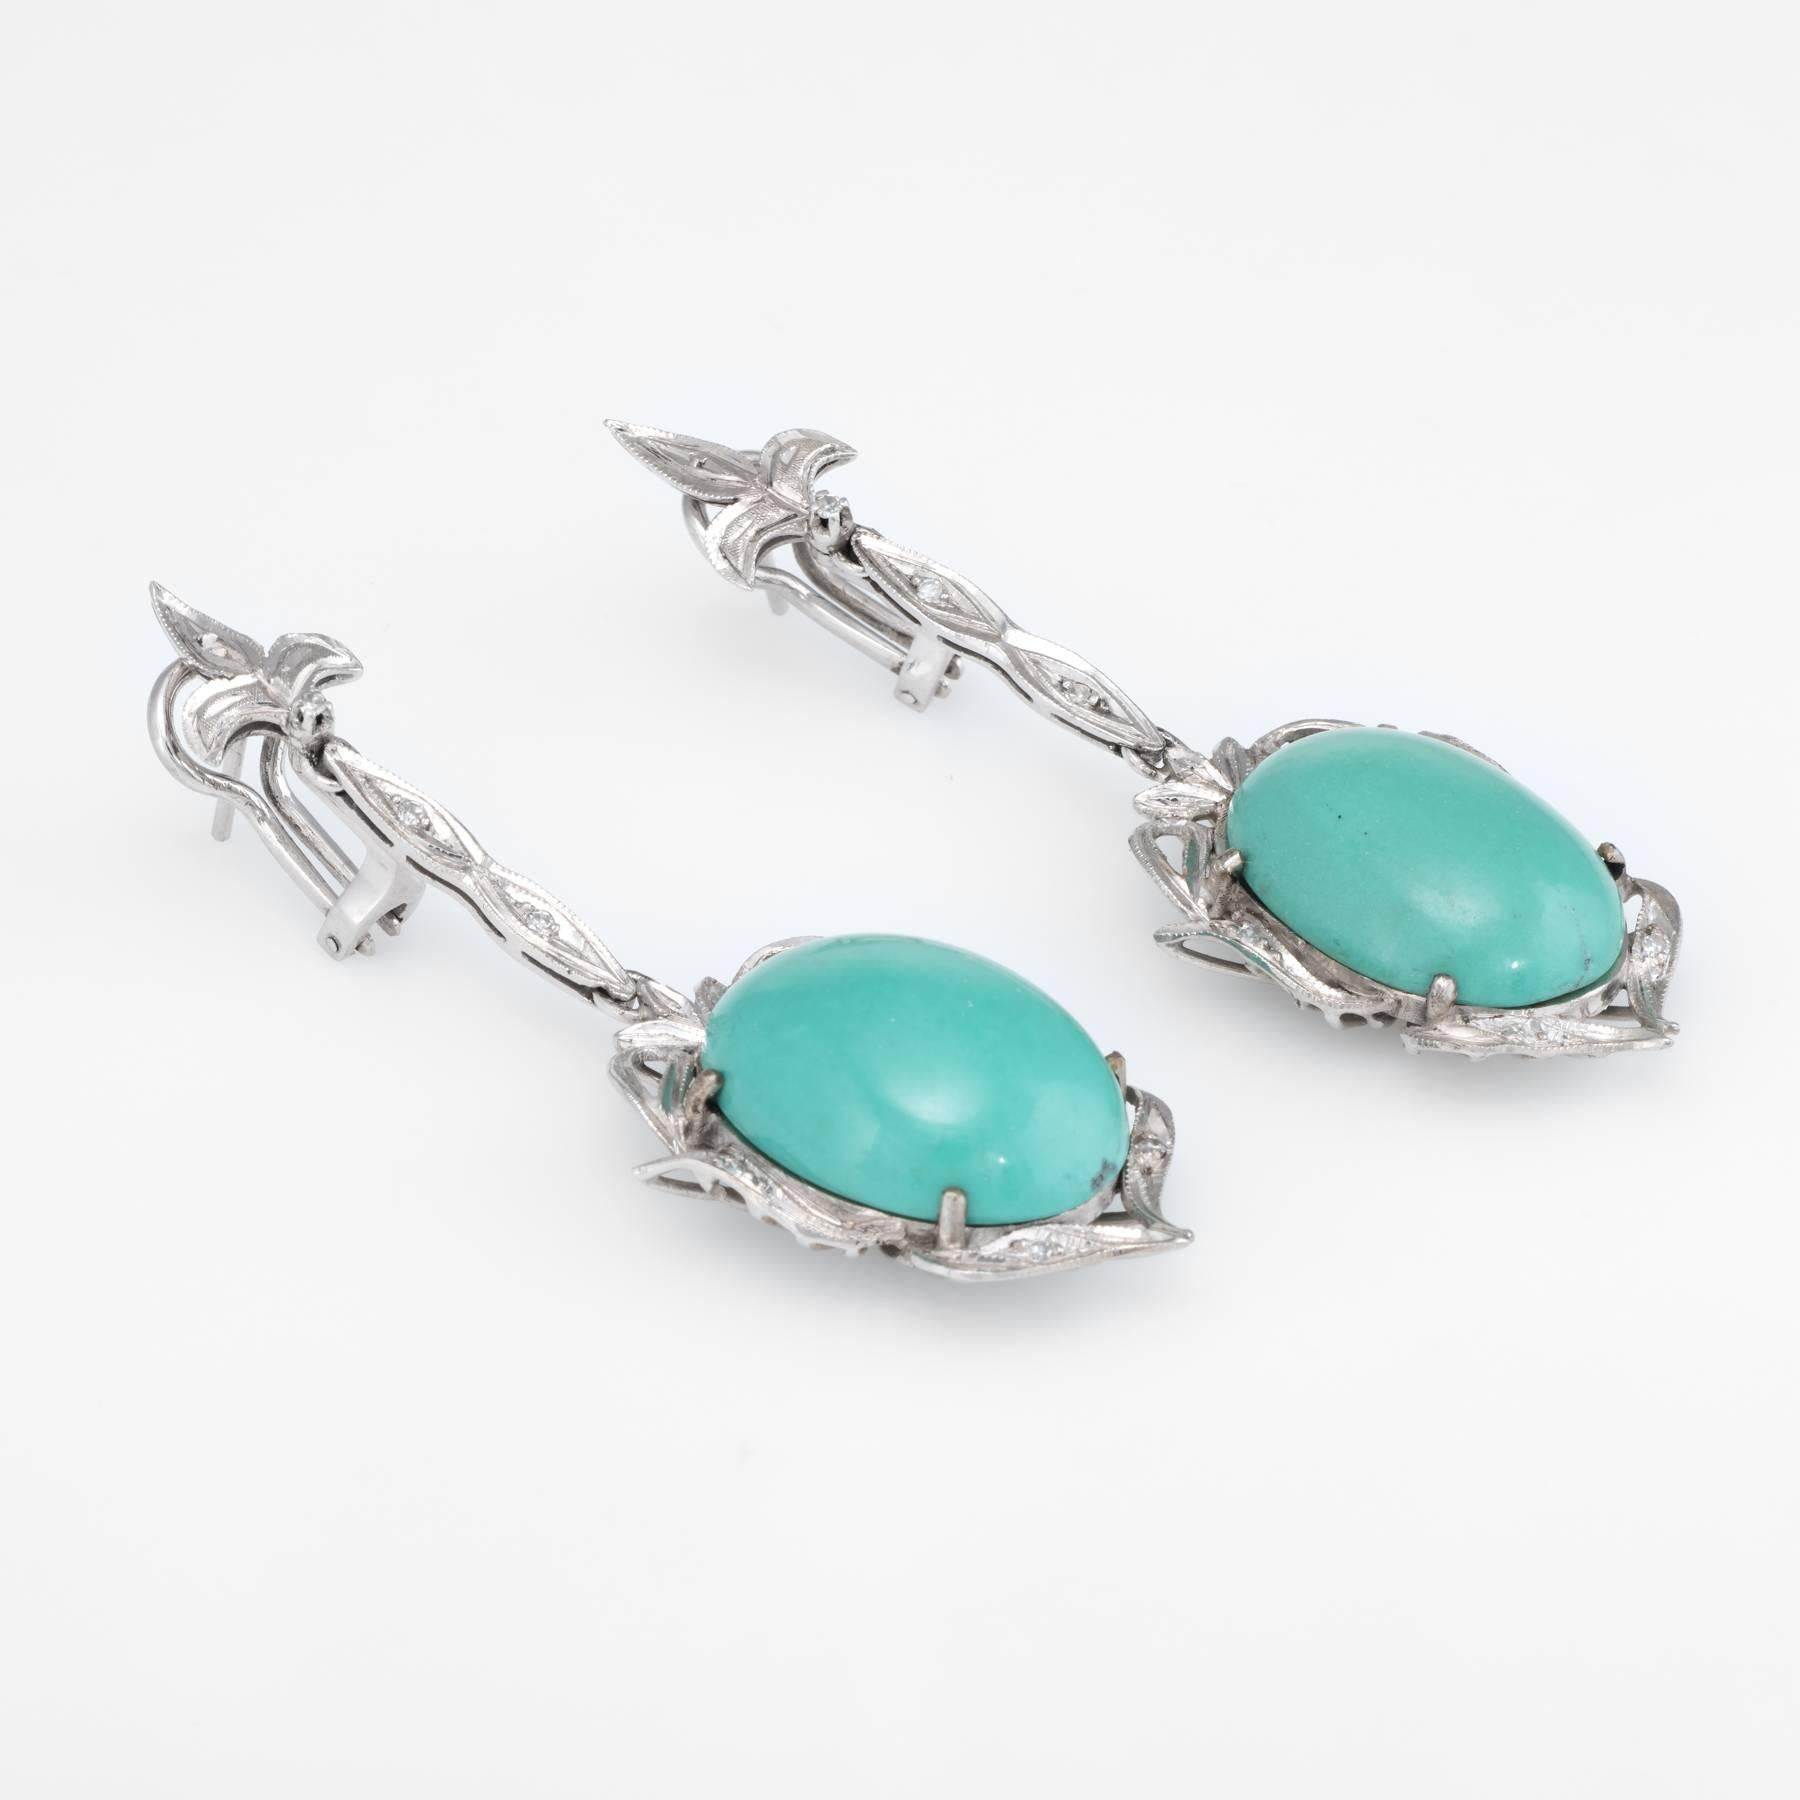 Overview:

Finely detailed pair of vintage turquoise & diamond earrings (circa 1950s to 1960s), crafted in 14k white gold. 

Two oval cabochon cut pieces of turquoise measure 21mm x 15mm (estimated at 21 carats each - 42 carats total estimated